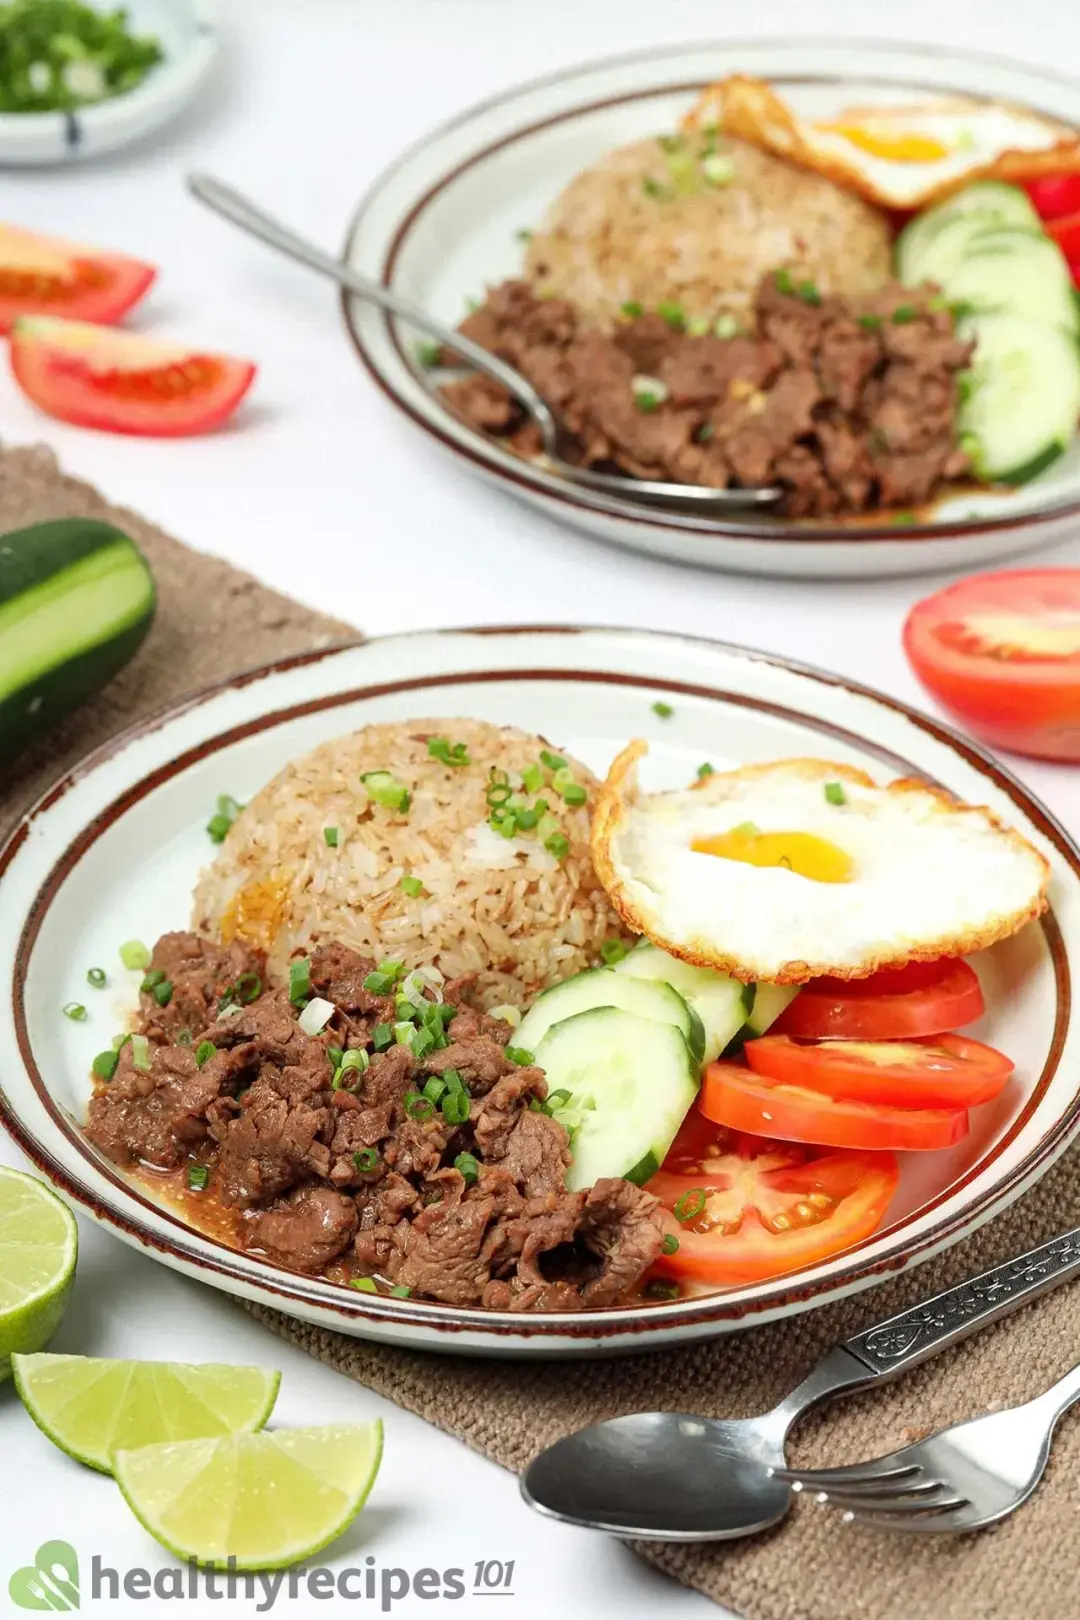 What to Serve With Beef Tapa